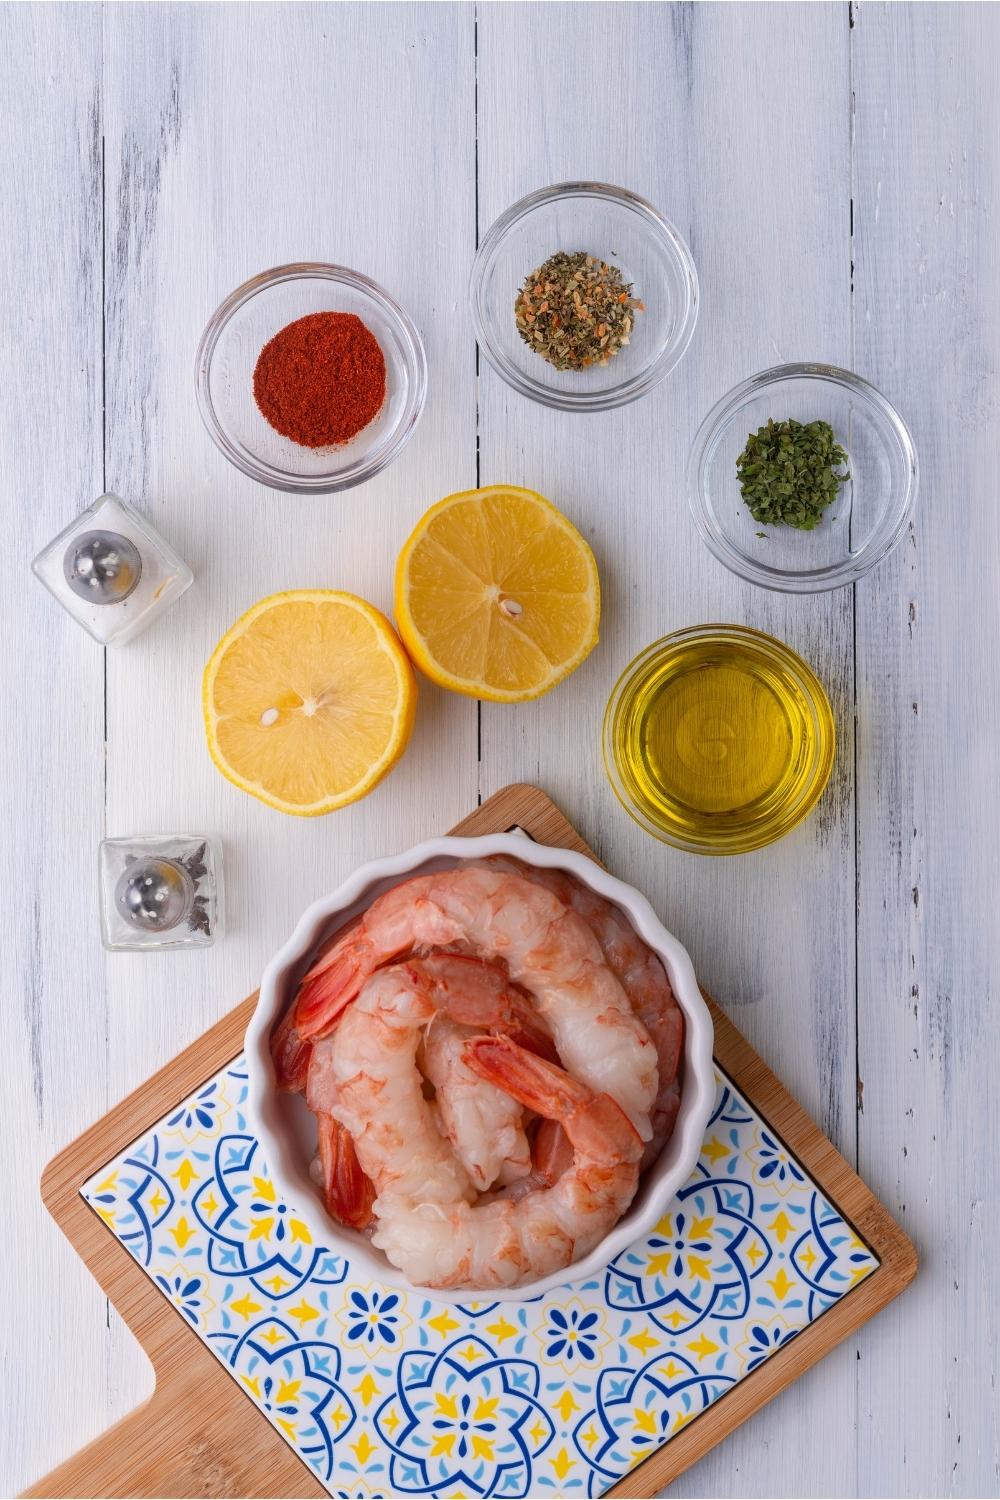 An assortment of ingredients for grilled shrimp including bowls of raw shrimp, seasonings, oil, and a lemon sliced in half.